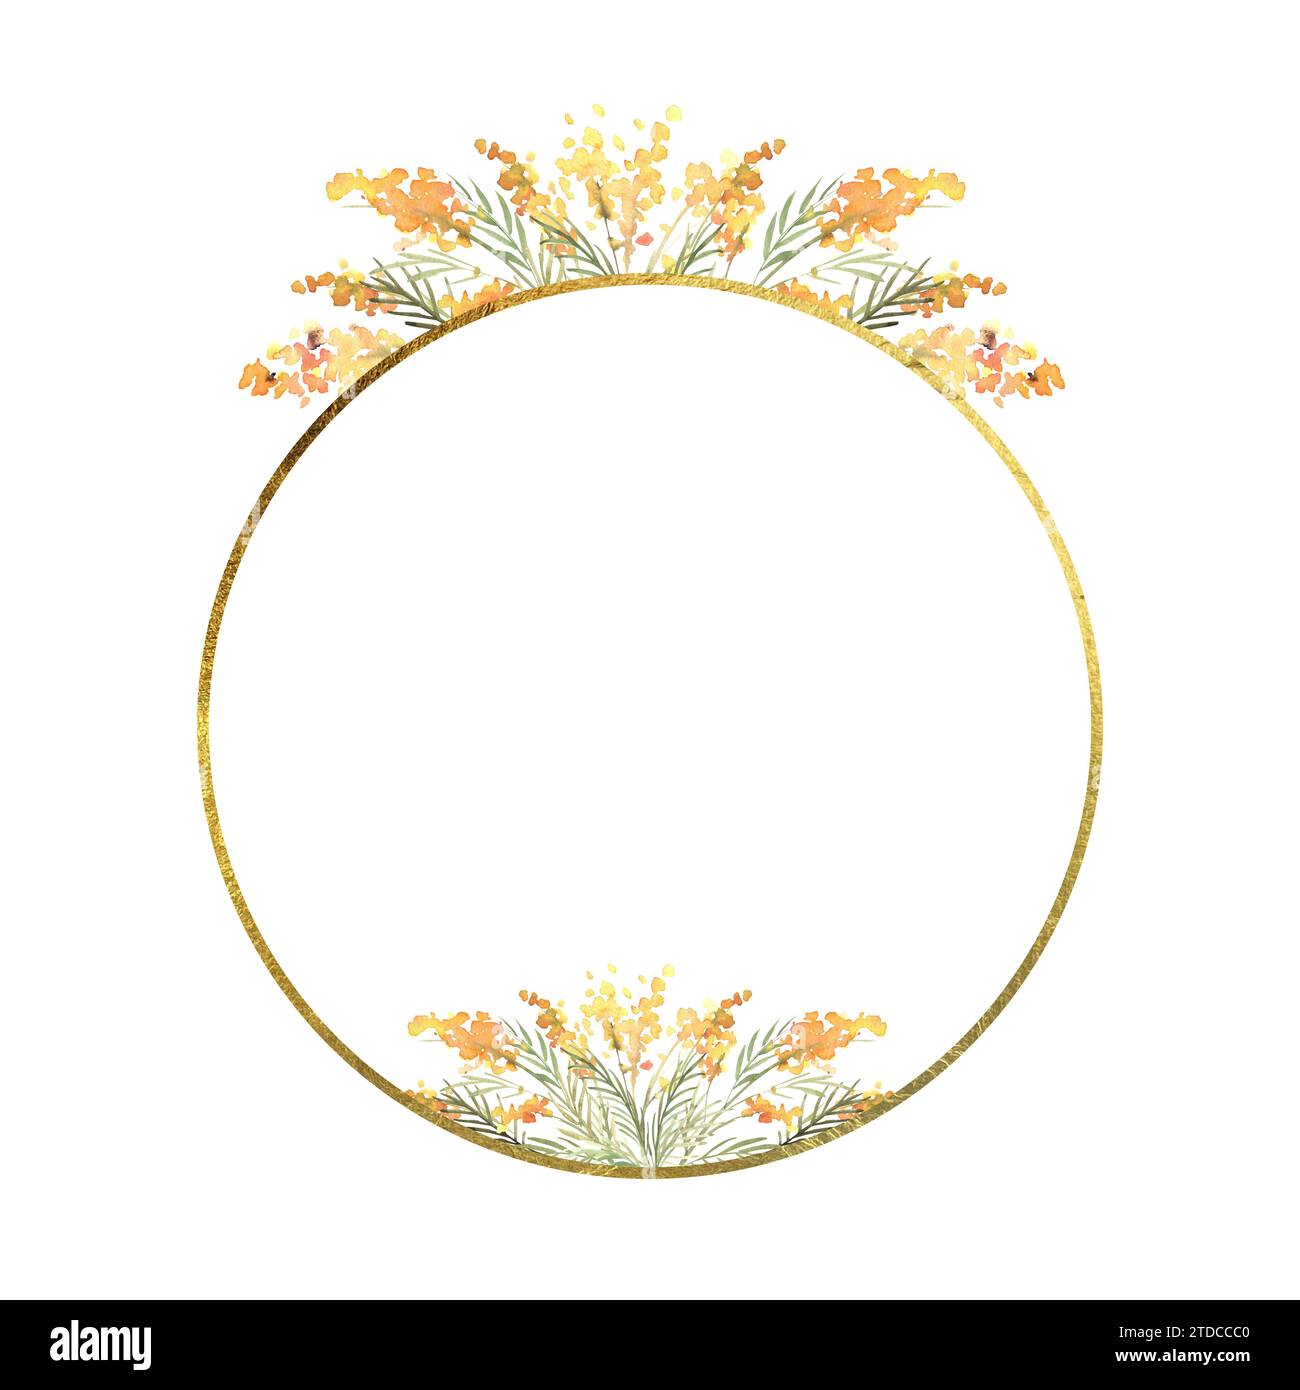 Circle frame yellow flower floral watercolor with gold circle